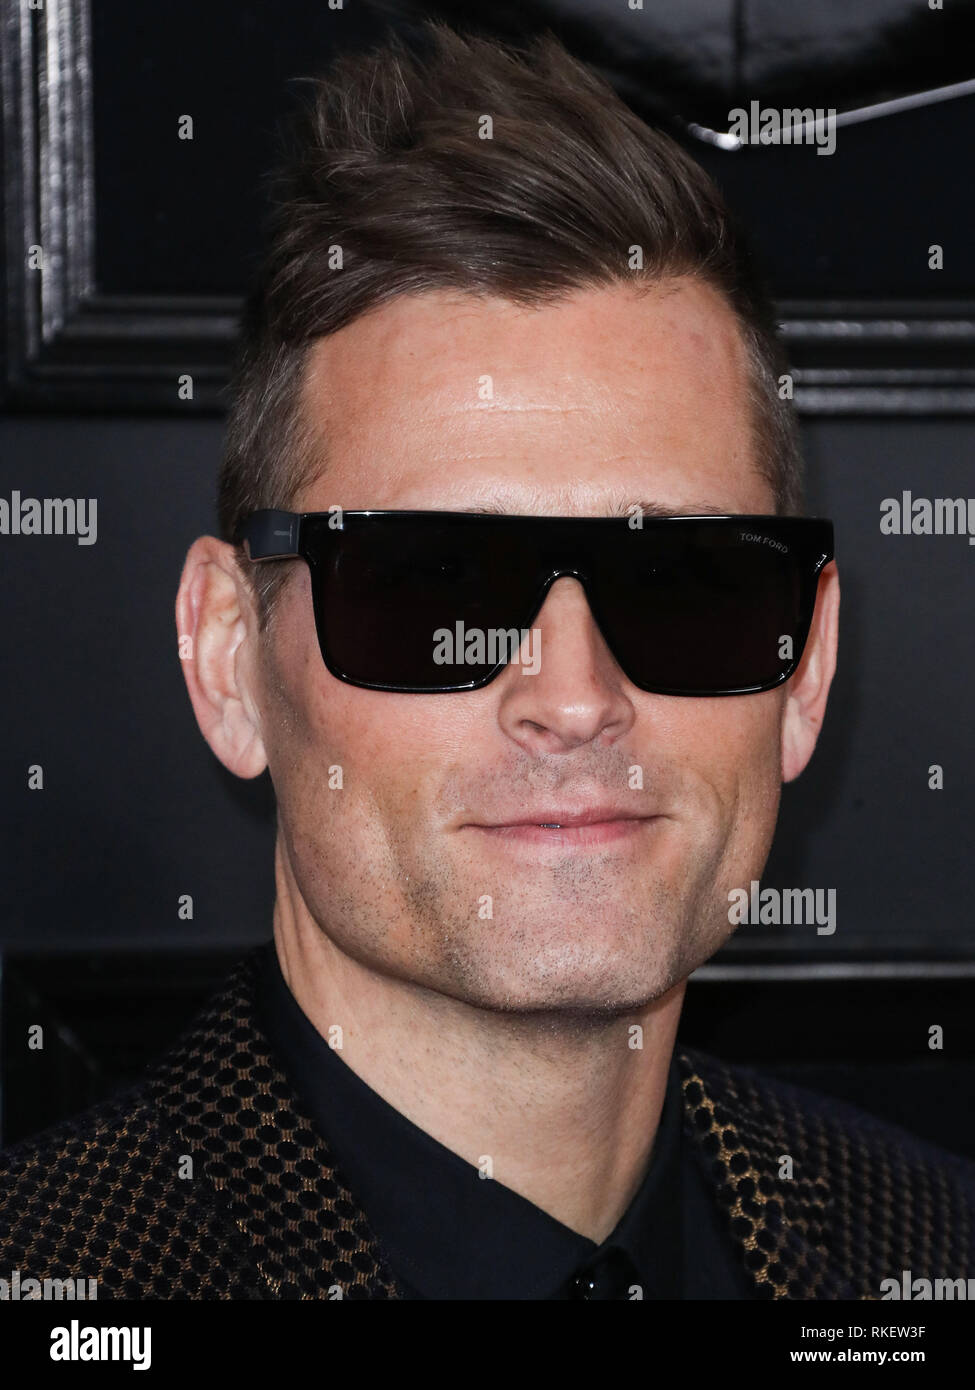 Los Angeles, United States. 10th Feb, 2019.LOS ANGELES, CA, USA - FEBRUARY 10: Kaskade arrives at the 61st Annual GRAMMY Awards held at Staples Center on February 10, 2019 in Los Angeles, California, United States. (Photo by Xavier Collin/Image Press Agency) Credit: Image Press Agency/Alamy Live News Stock Photo